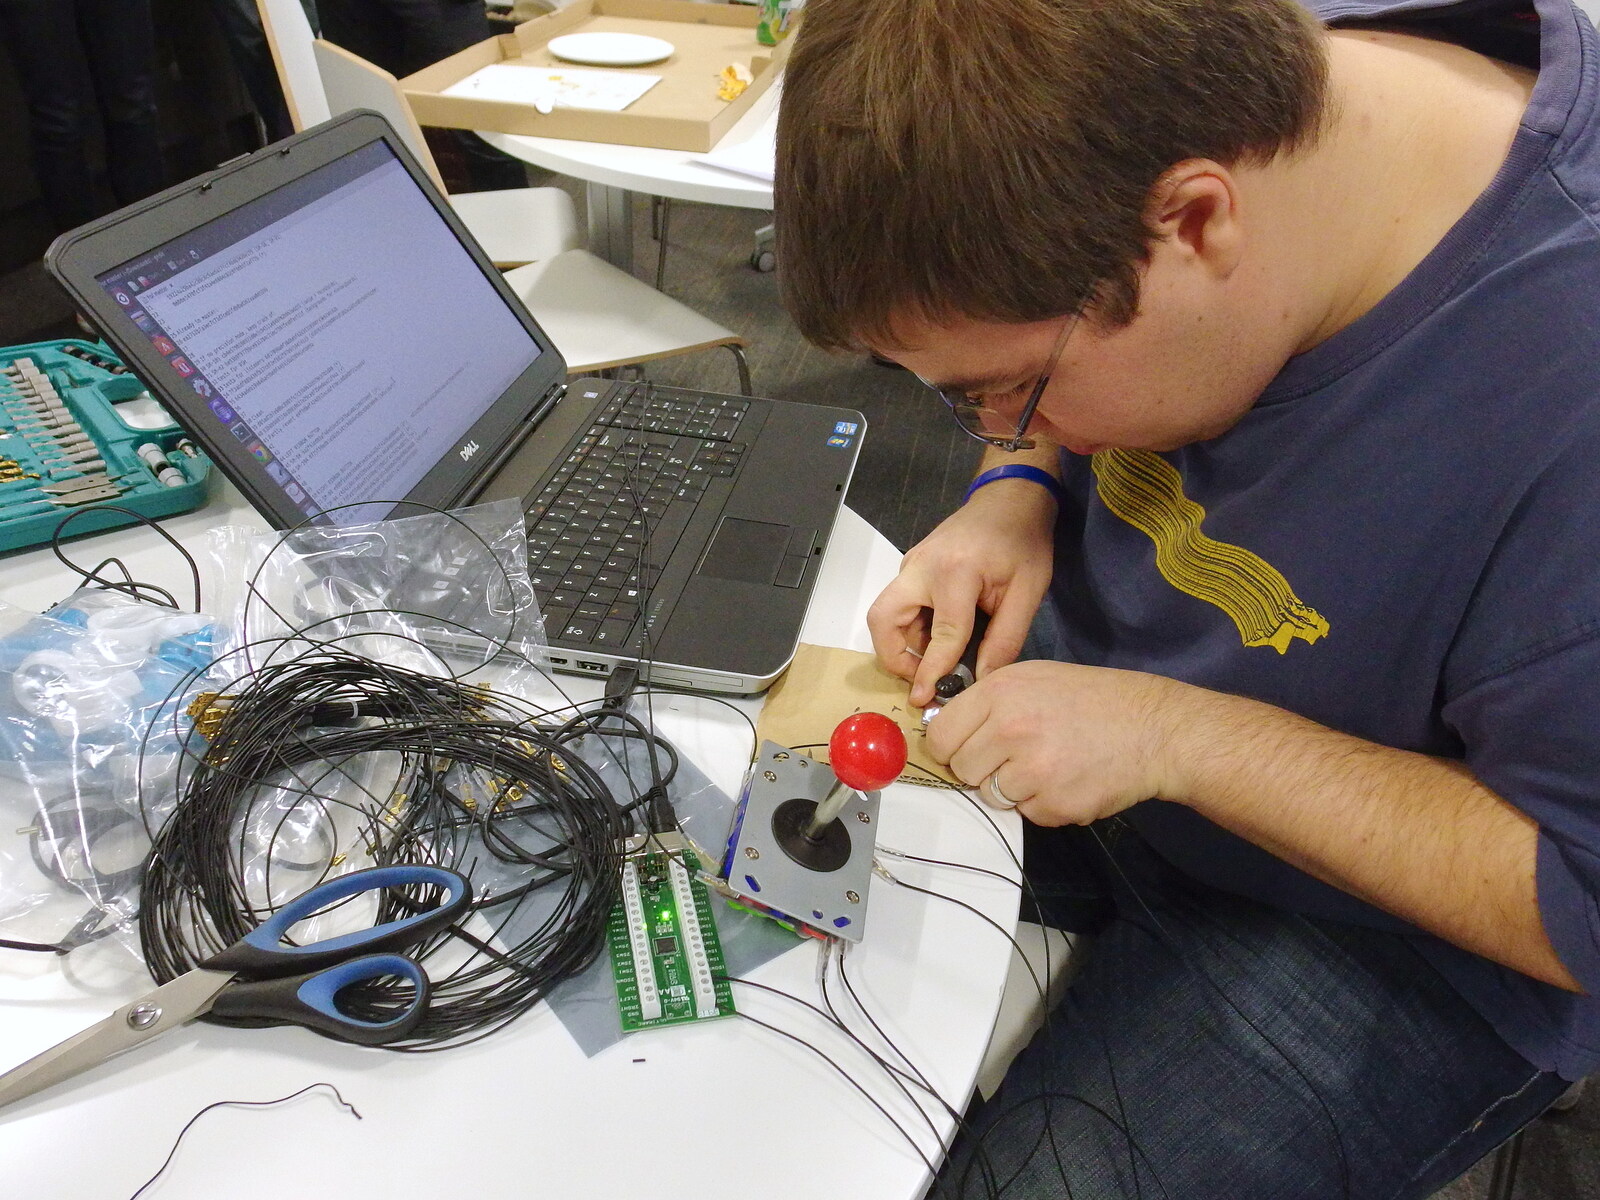 Craig with a load of wiring from SwiftKey's Arcade Cabinet, and the Streets of Southwark, London - 5th December 2013